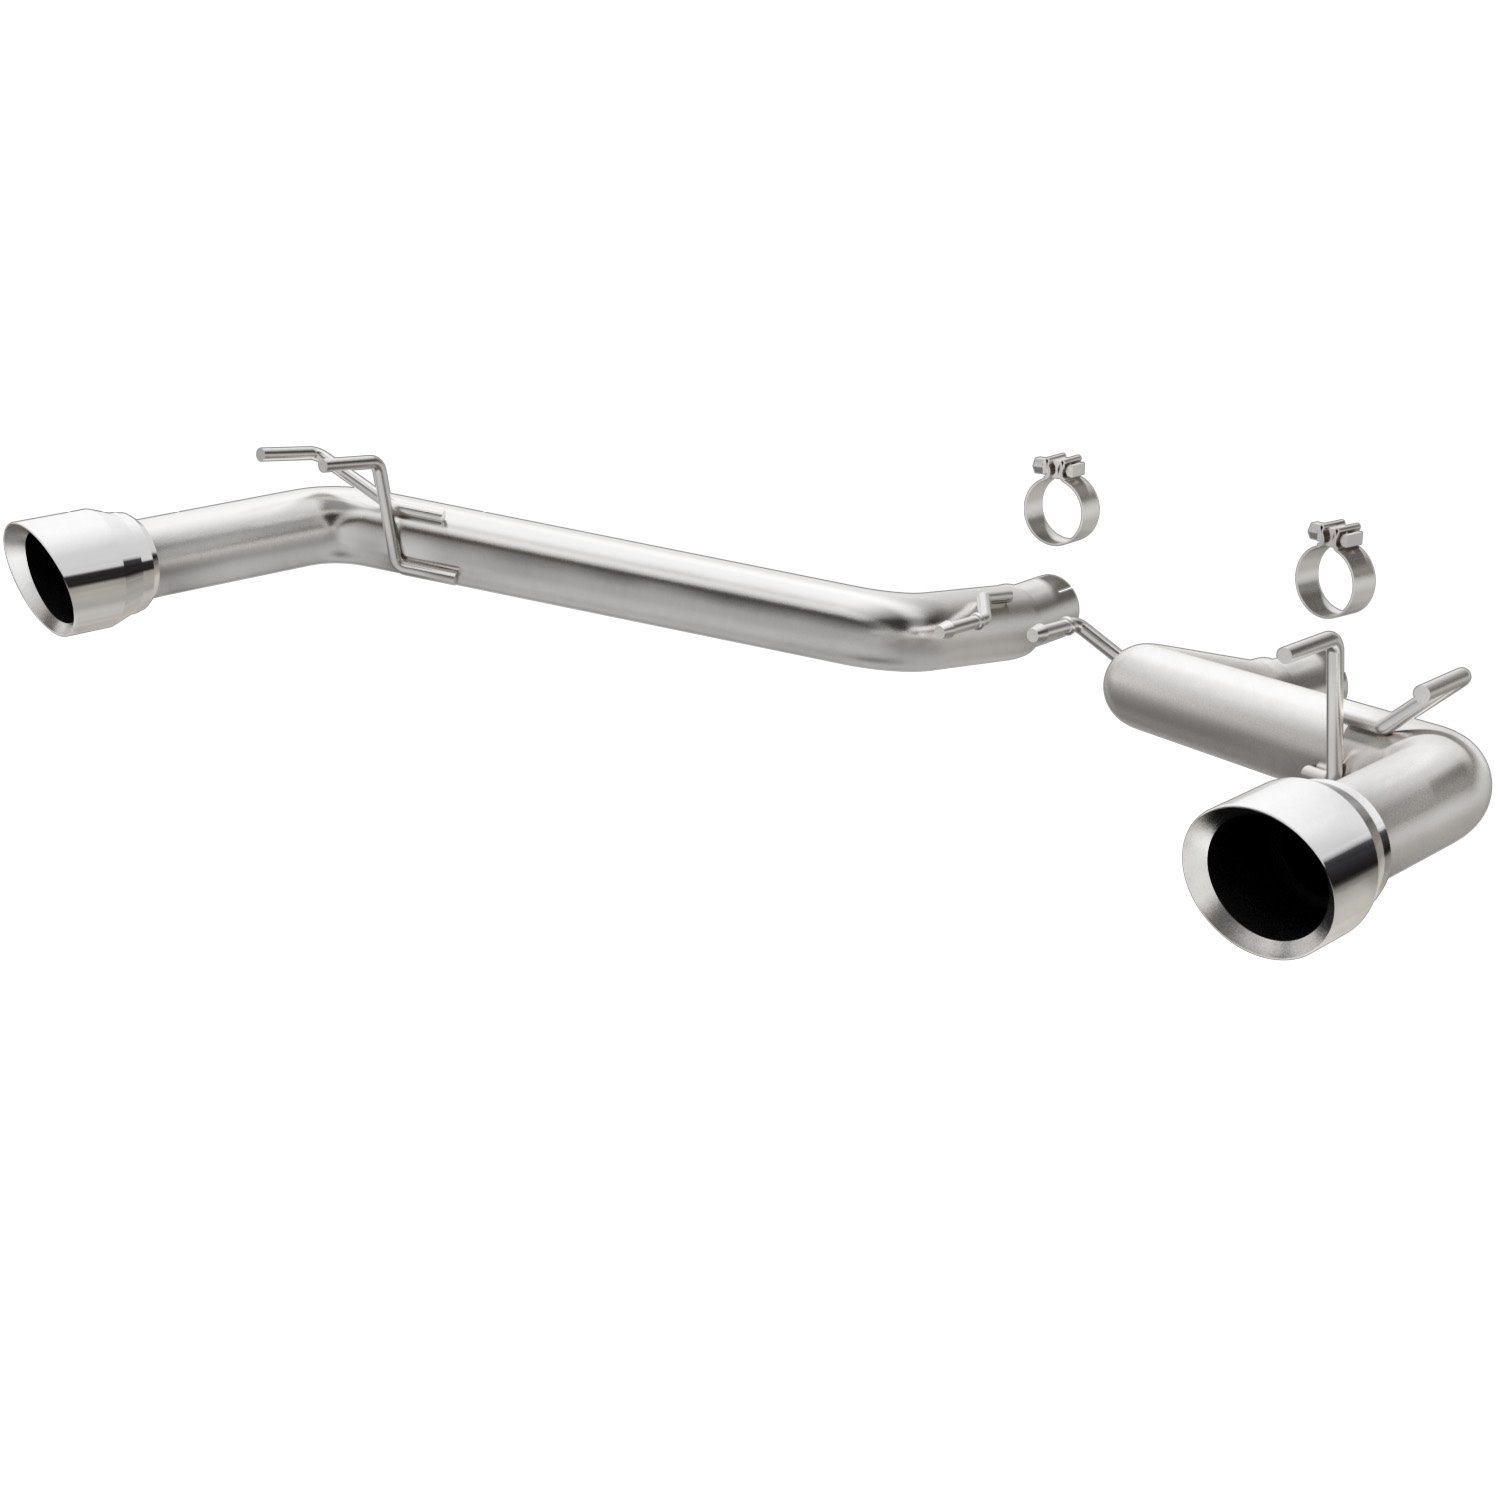 Axle-Back Exhaust System 2014-2015 Camaro V8 6.2L Convertible